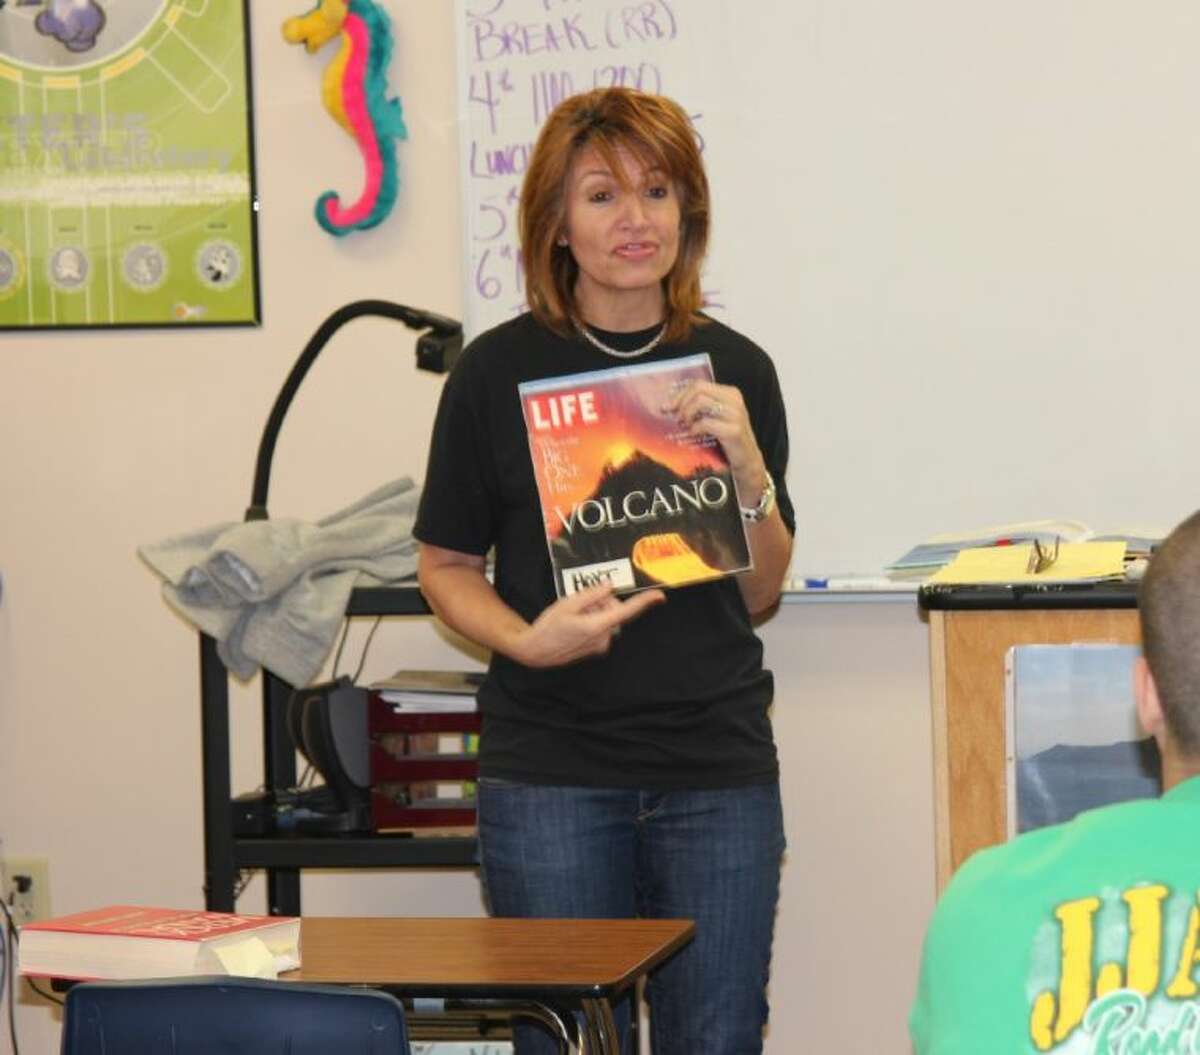 CISD Science teacher Jeanne Hoyt teaches science at the Juvenile Justice Alternative Education Program. School starts in three weeks. Juvenile offenders from every school district in Montgomery County attend classes at the JJAEP if expelled from school.